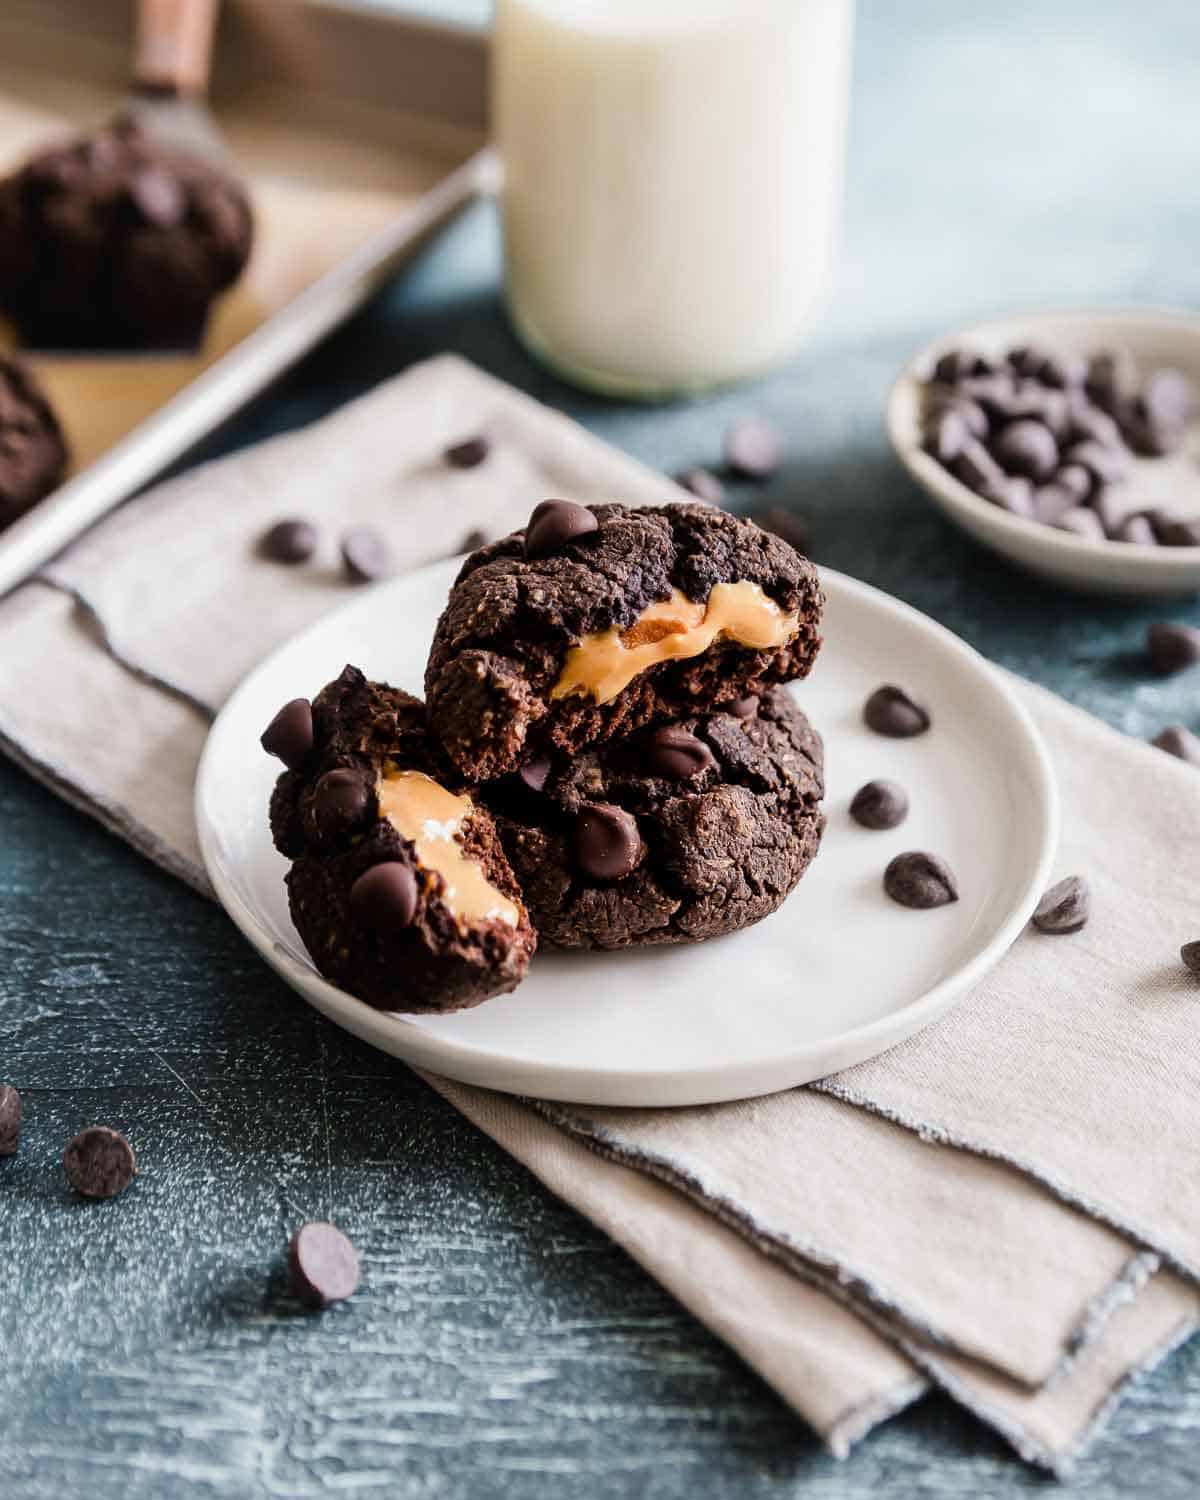 These black bean cookies are stuffed with creamy peanut butter for a decadent and gooey center. They're a healthier, nutritious and gluten-free way to indulge!